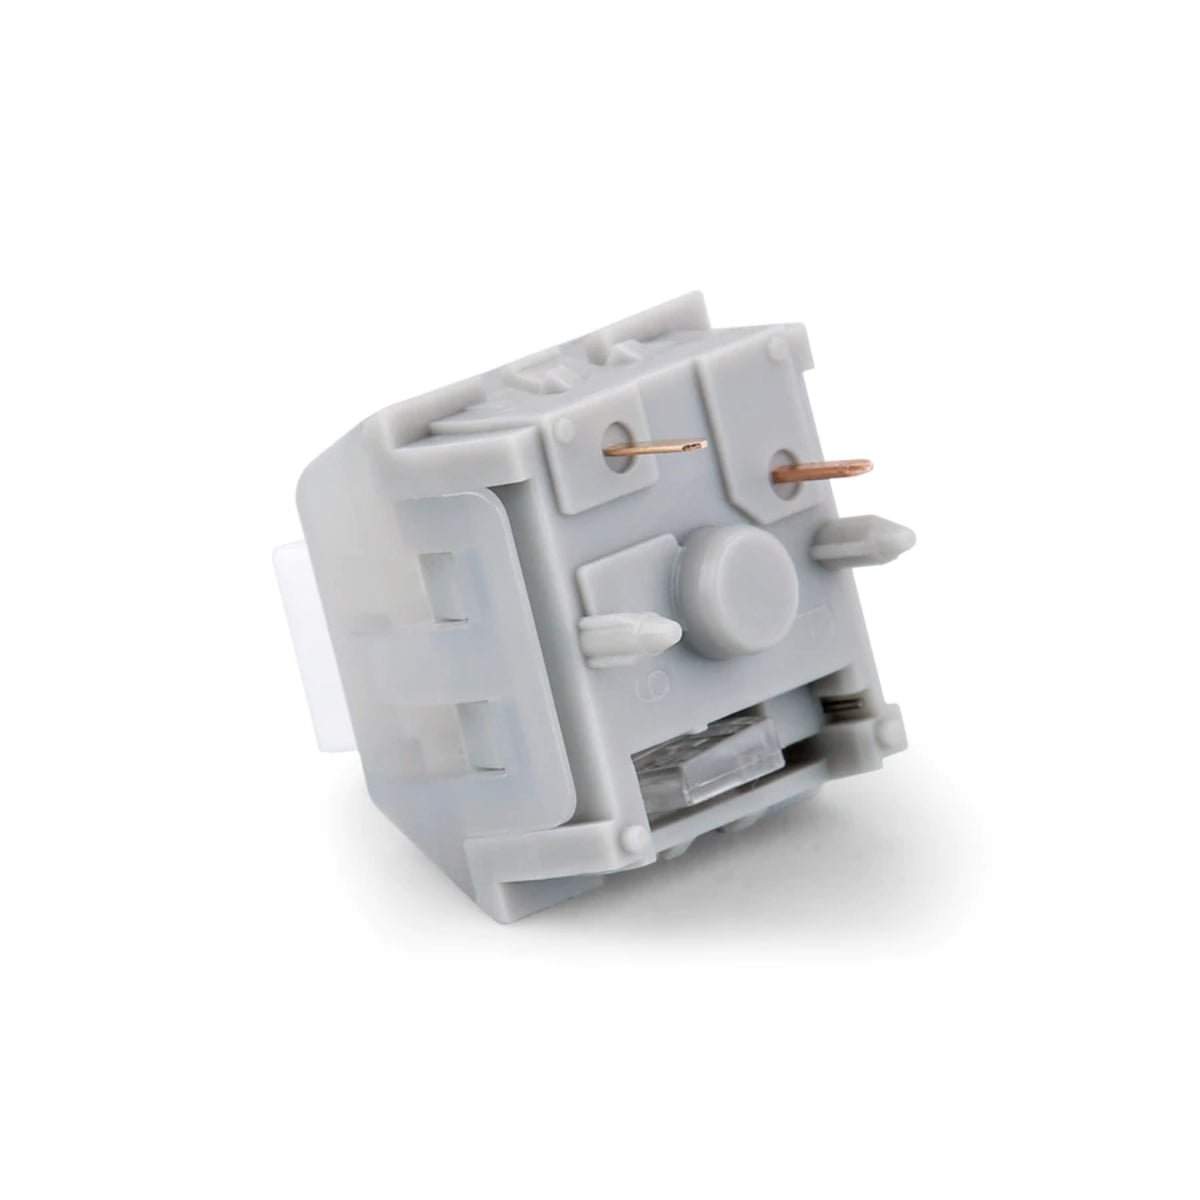 KBD Fans Kailh Box Clicky Switches - White Owl - Store 974 | ستور ٩٧٤